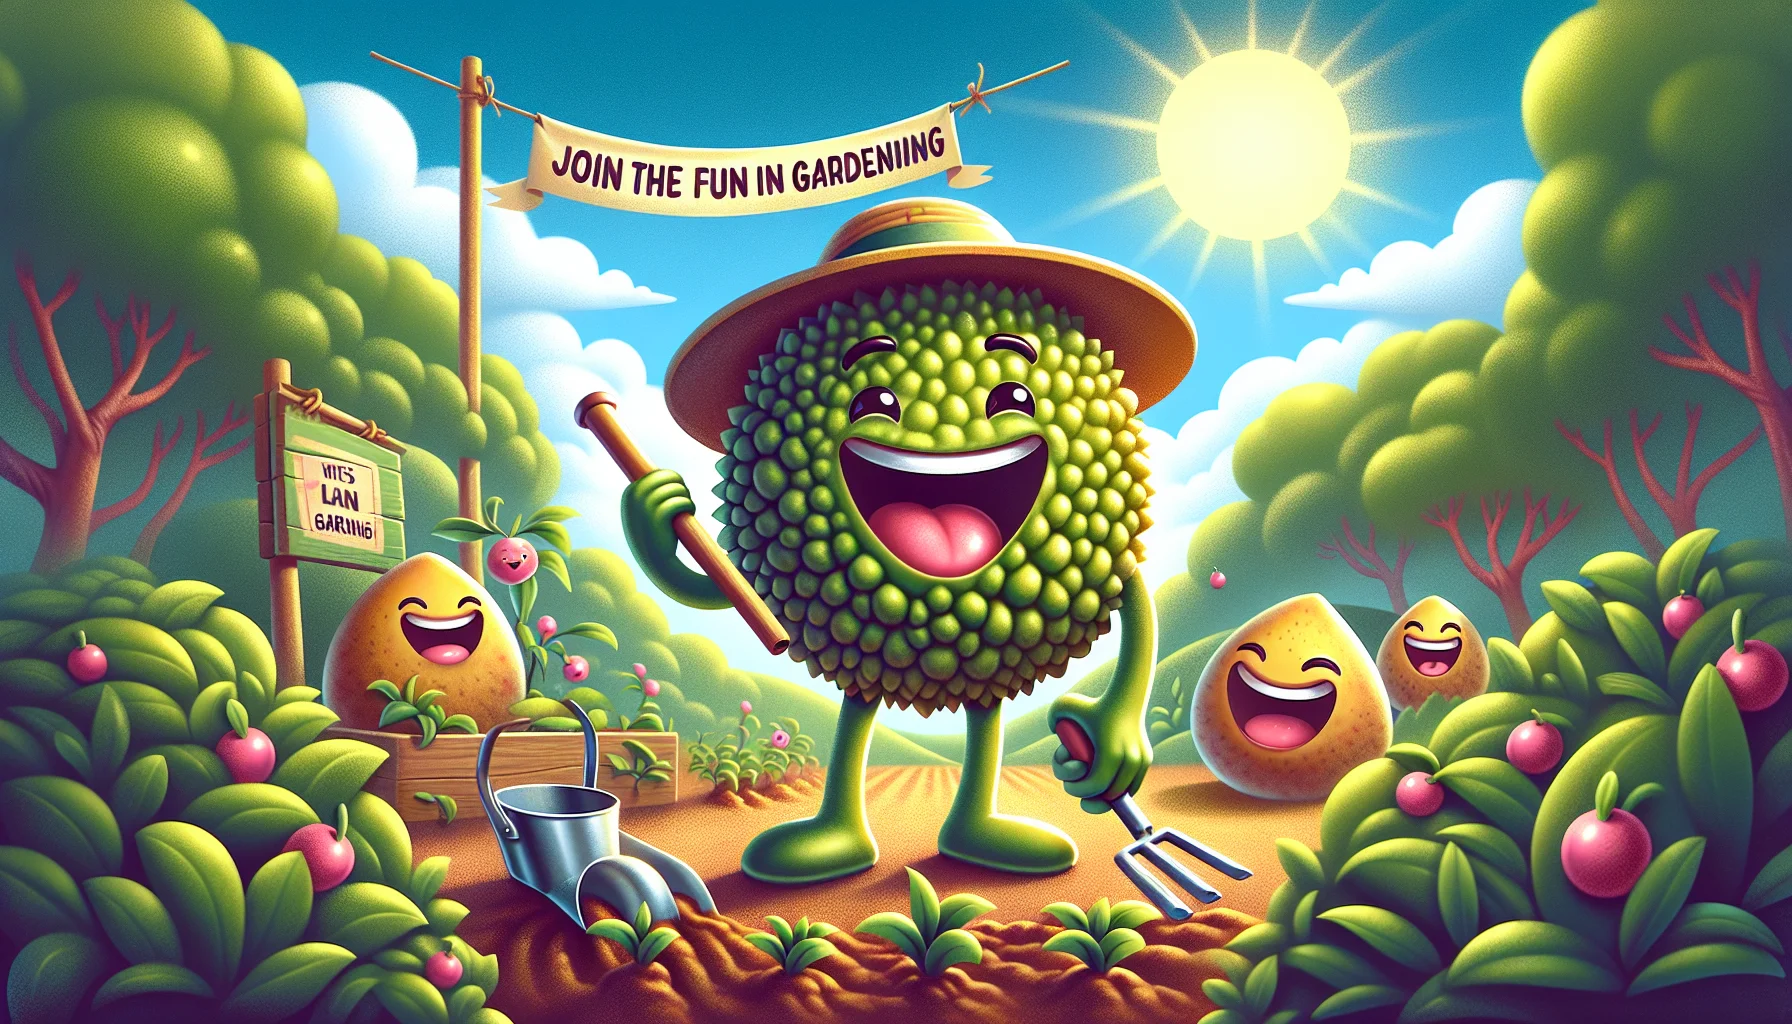 Visualize a humorous scene involving litchi. The litchi is anthropomorphized, showcasing human-like expressions and movements. It wears a green gardener's hat and holds a small hoe. It's joyously taking care of a tiny garden plot. The background depicts lush foliage and thriving plants under a bright, warm sun. Nearby are other laughing fruits and vegetables, inspired by litchi's infectious enthusiasm, willingly participating in gardening activities. A banner flies above with the words 'Join the fun in gardening', positioning gardening as enjoyable and rewarding.